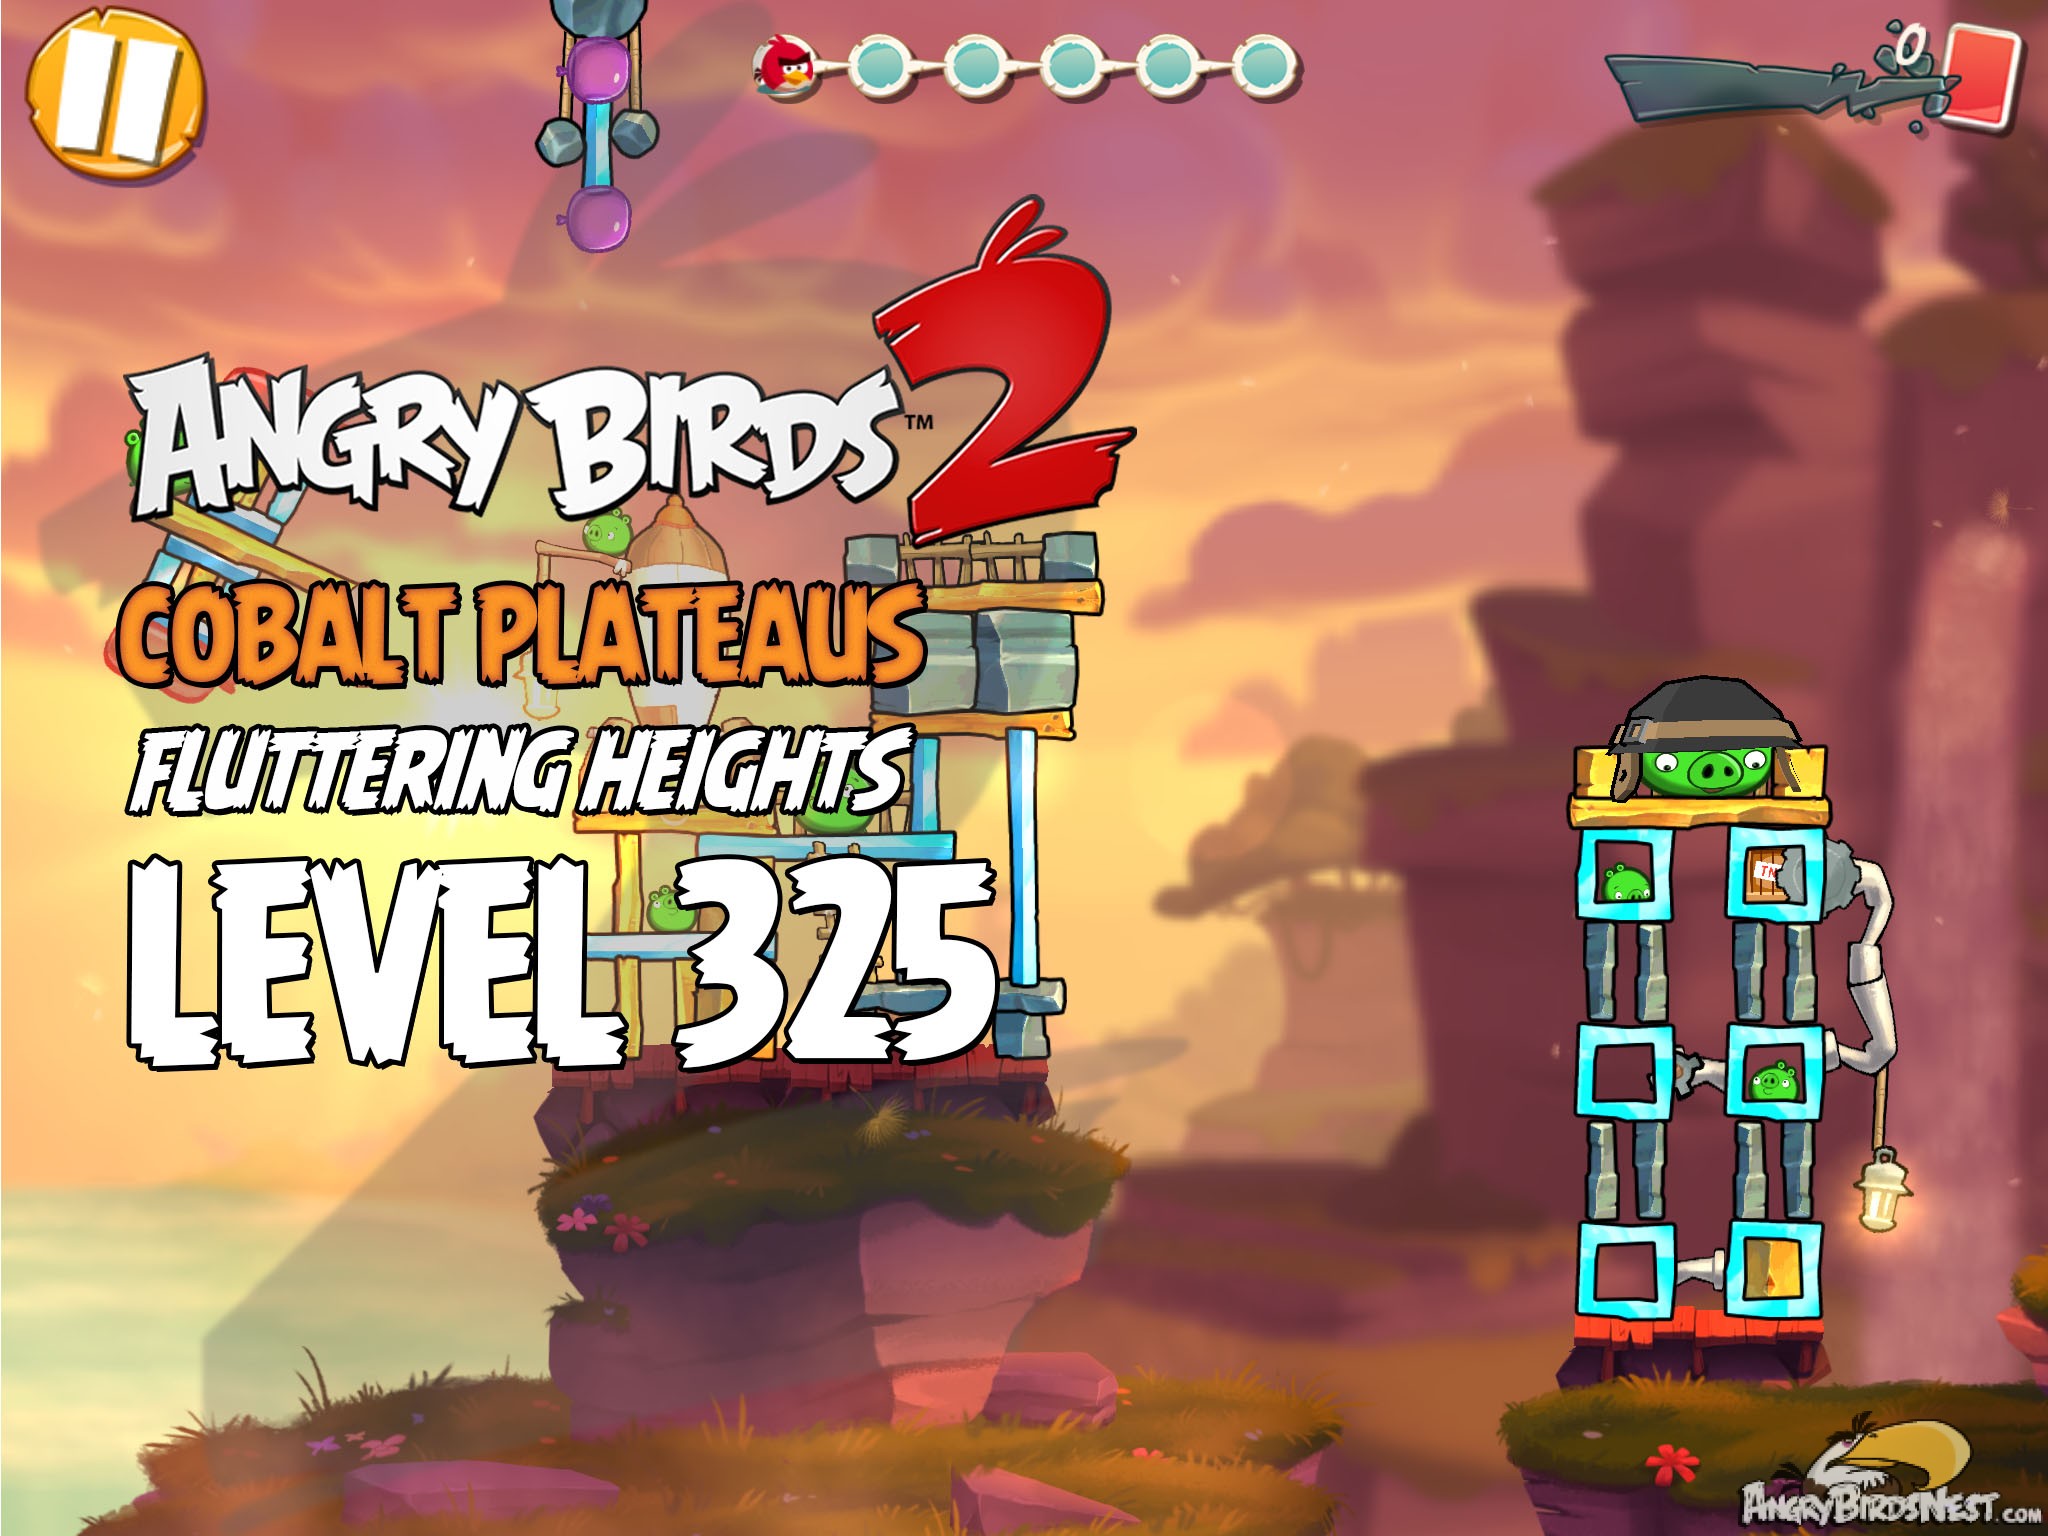 Angry Birds 2 Level 325 Cobalt Plateaus Fluttering Heights Image